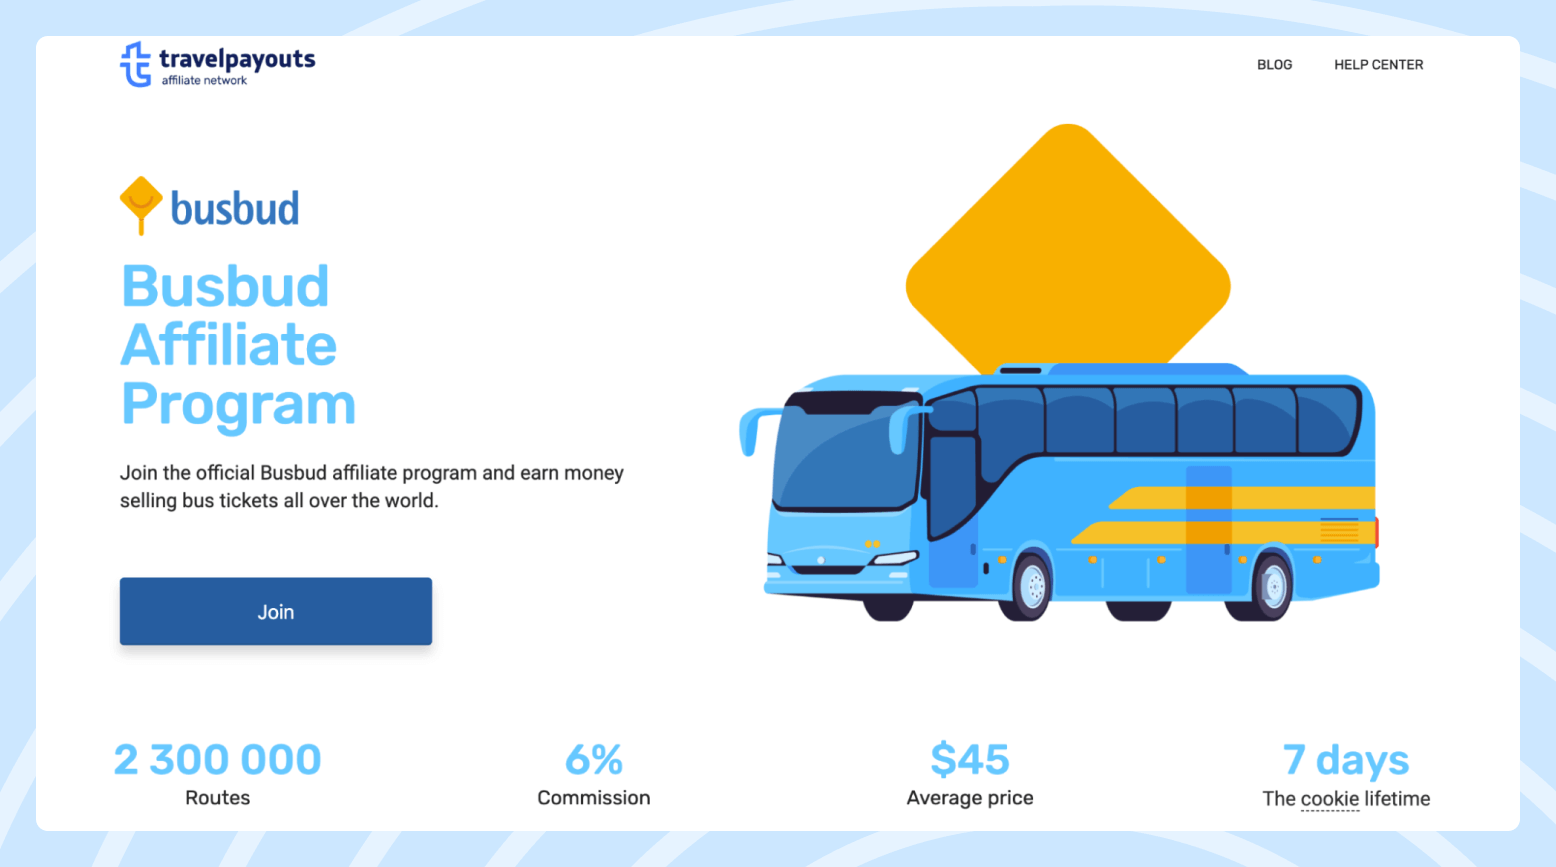 Screenshot of the BusBud affiliate program page featuring a blue bus.